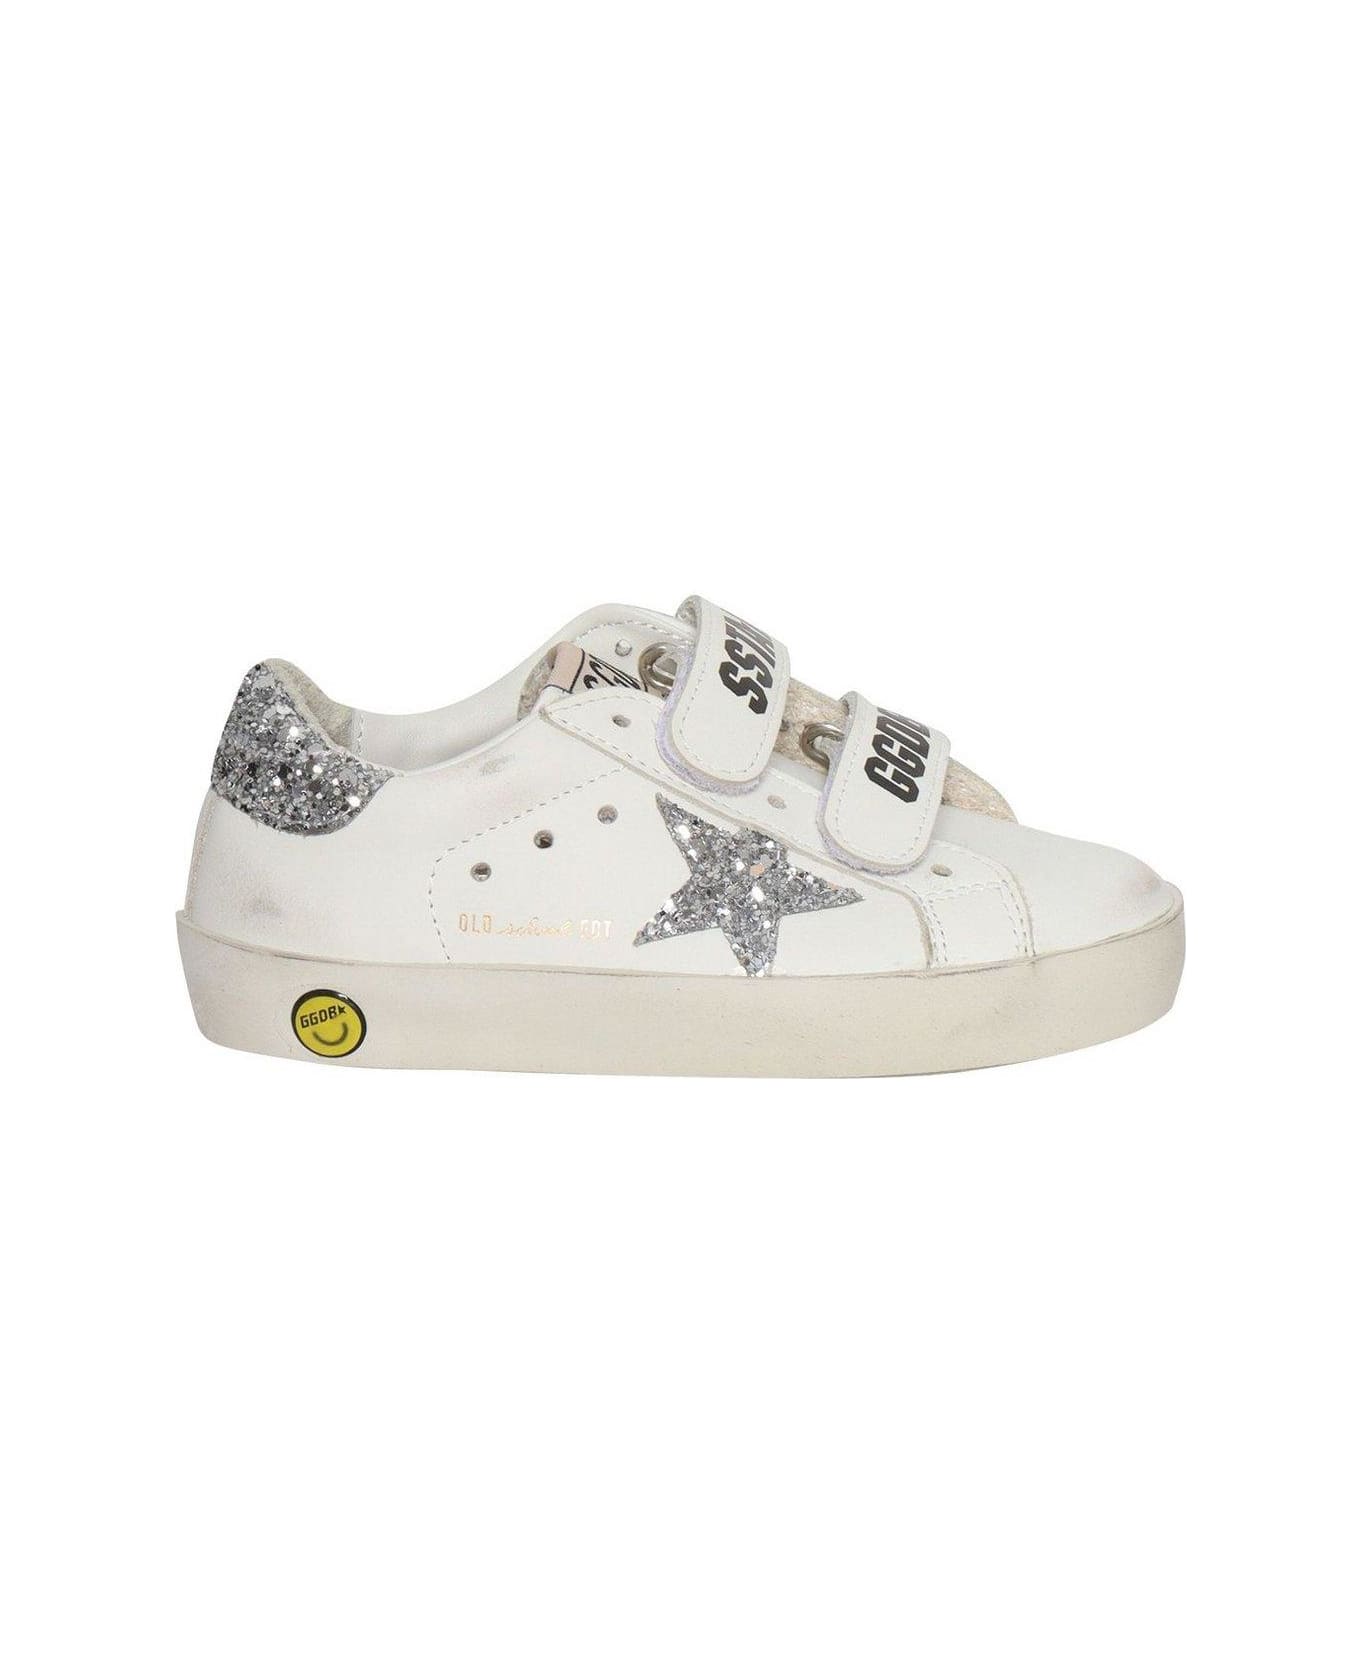 Golden Goose Old School Star Patch Sneakers - White/ice/silver